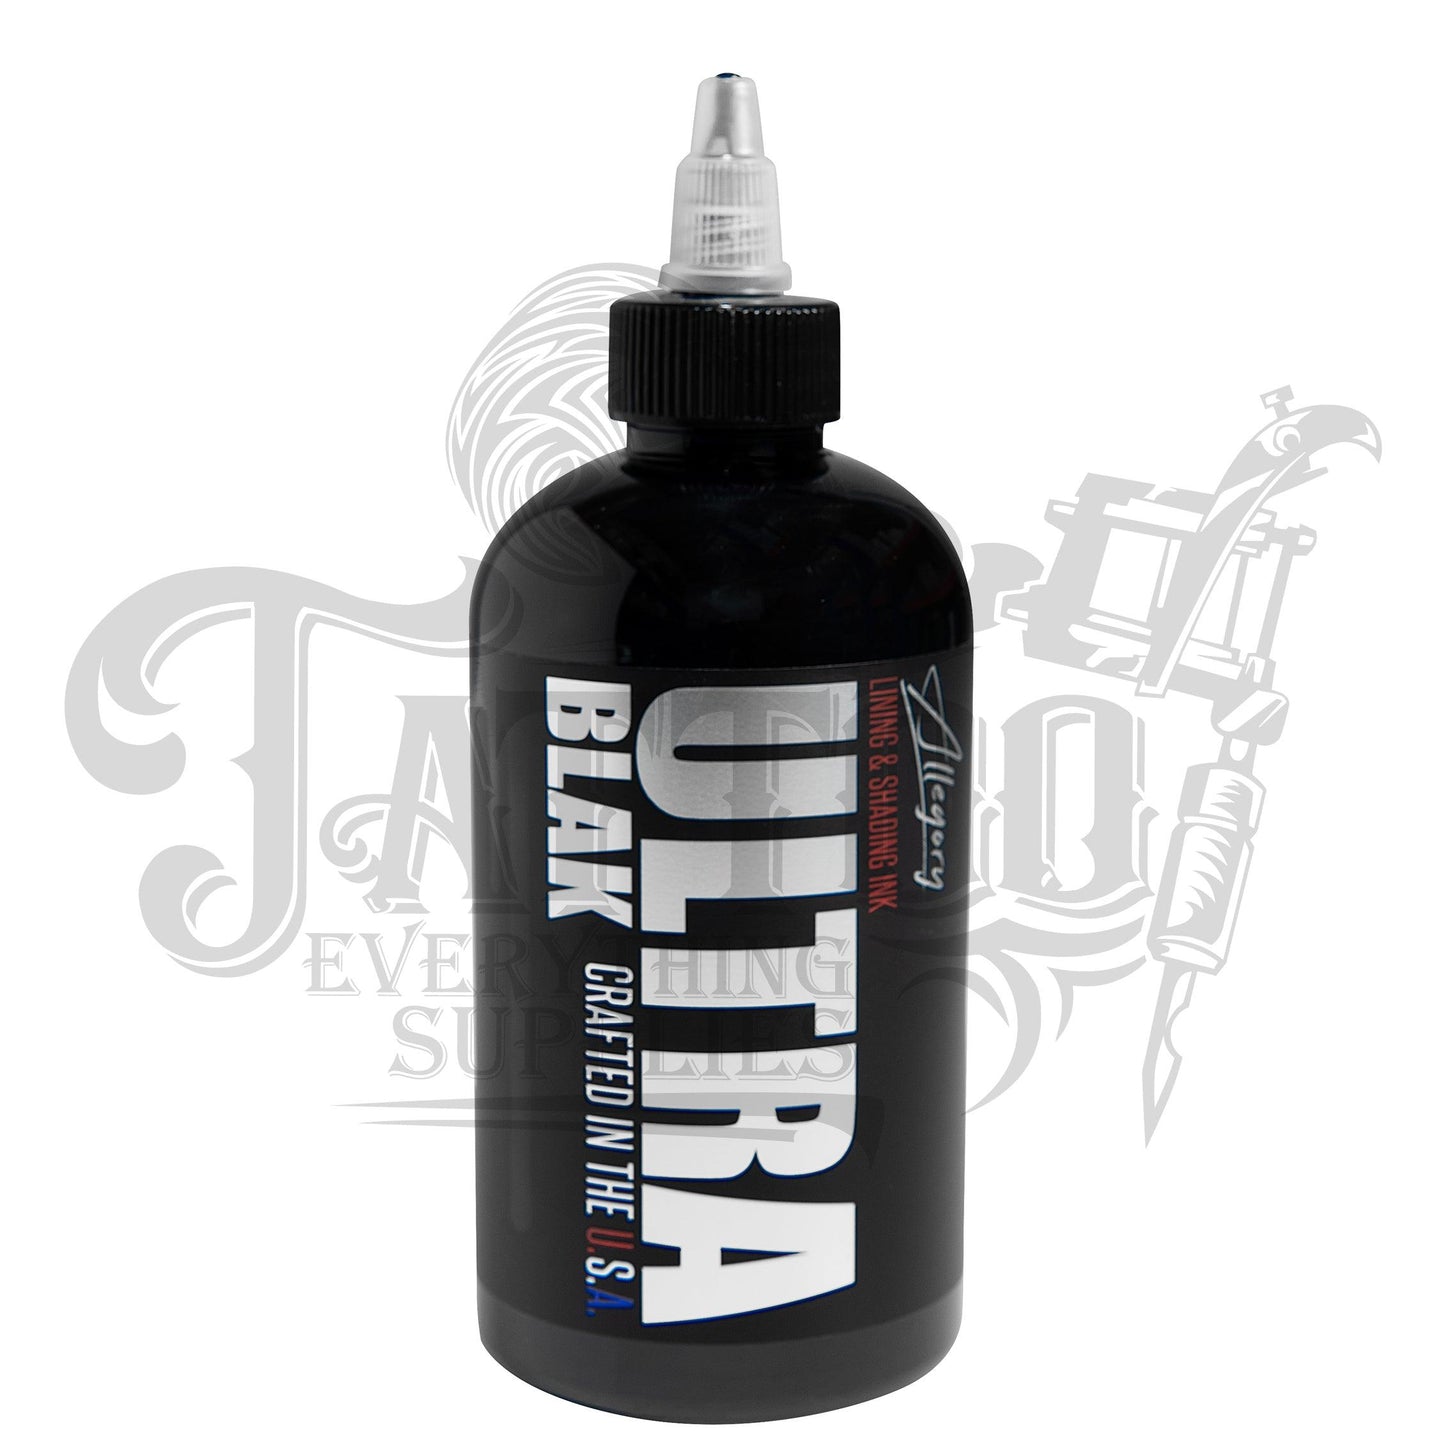 Allegory ULTRA BLAK Lining Shading Blackout Tattoo Ink - Tattoo Everything Supplies